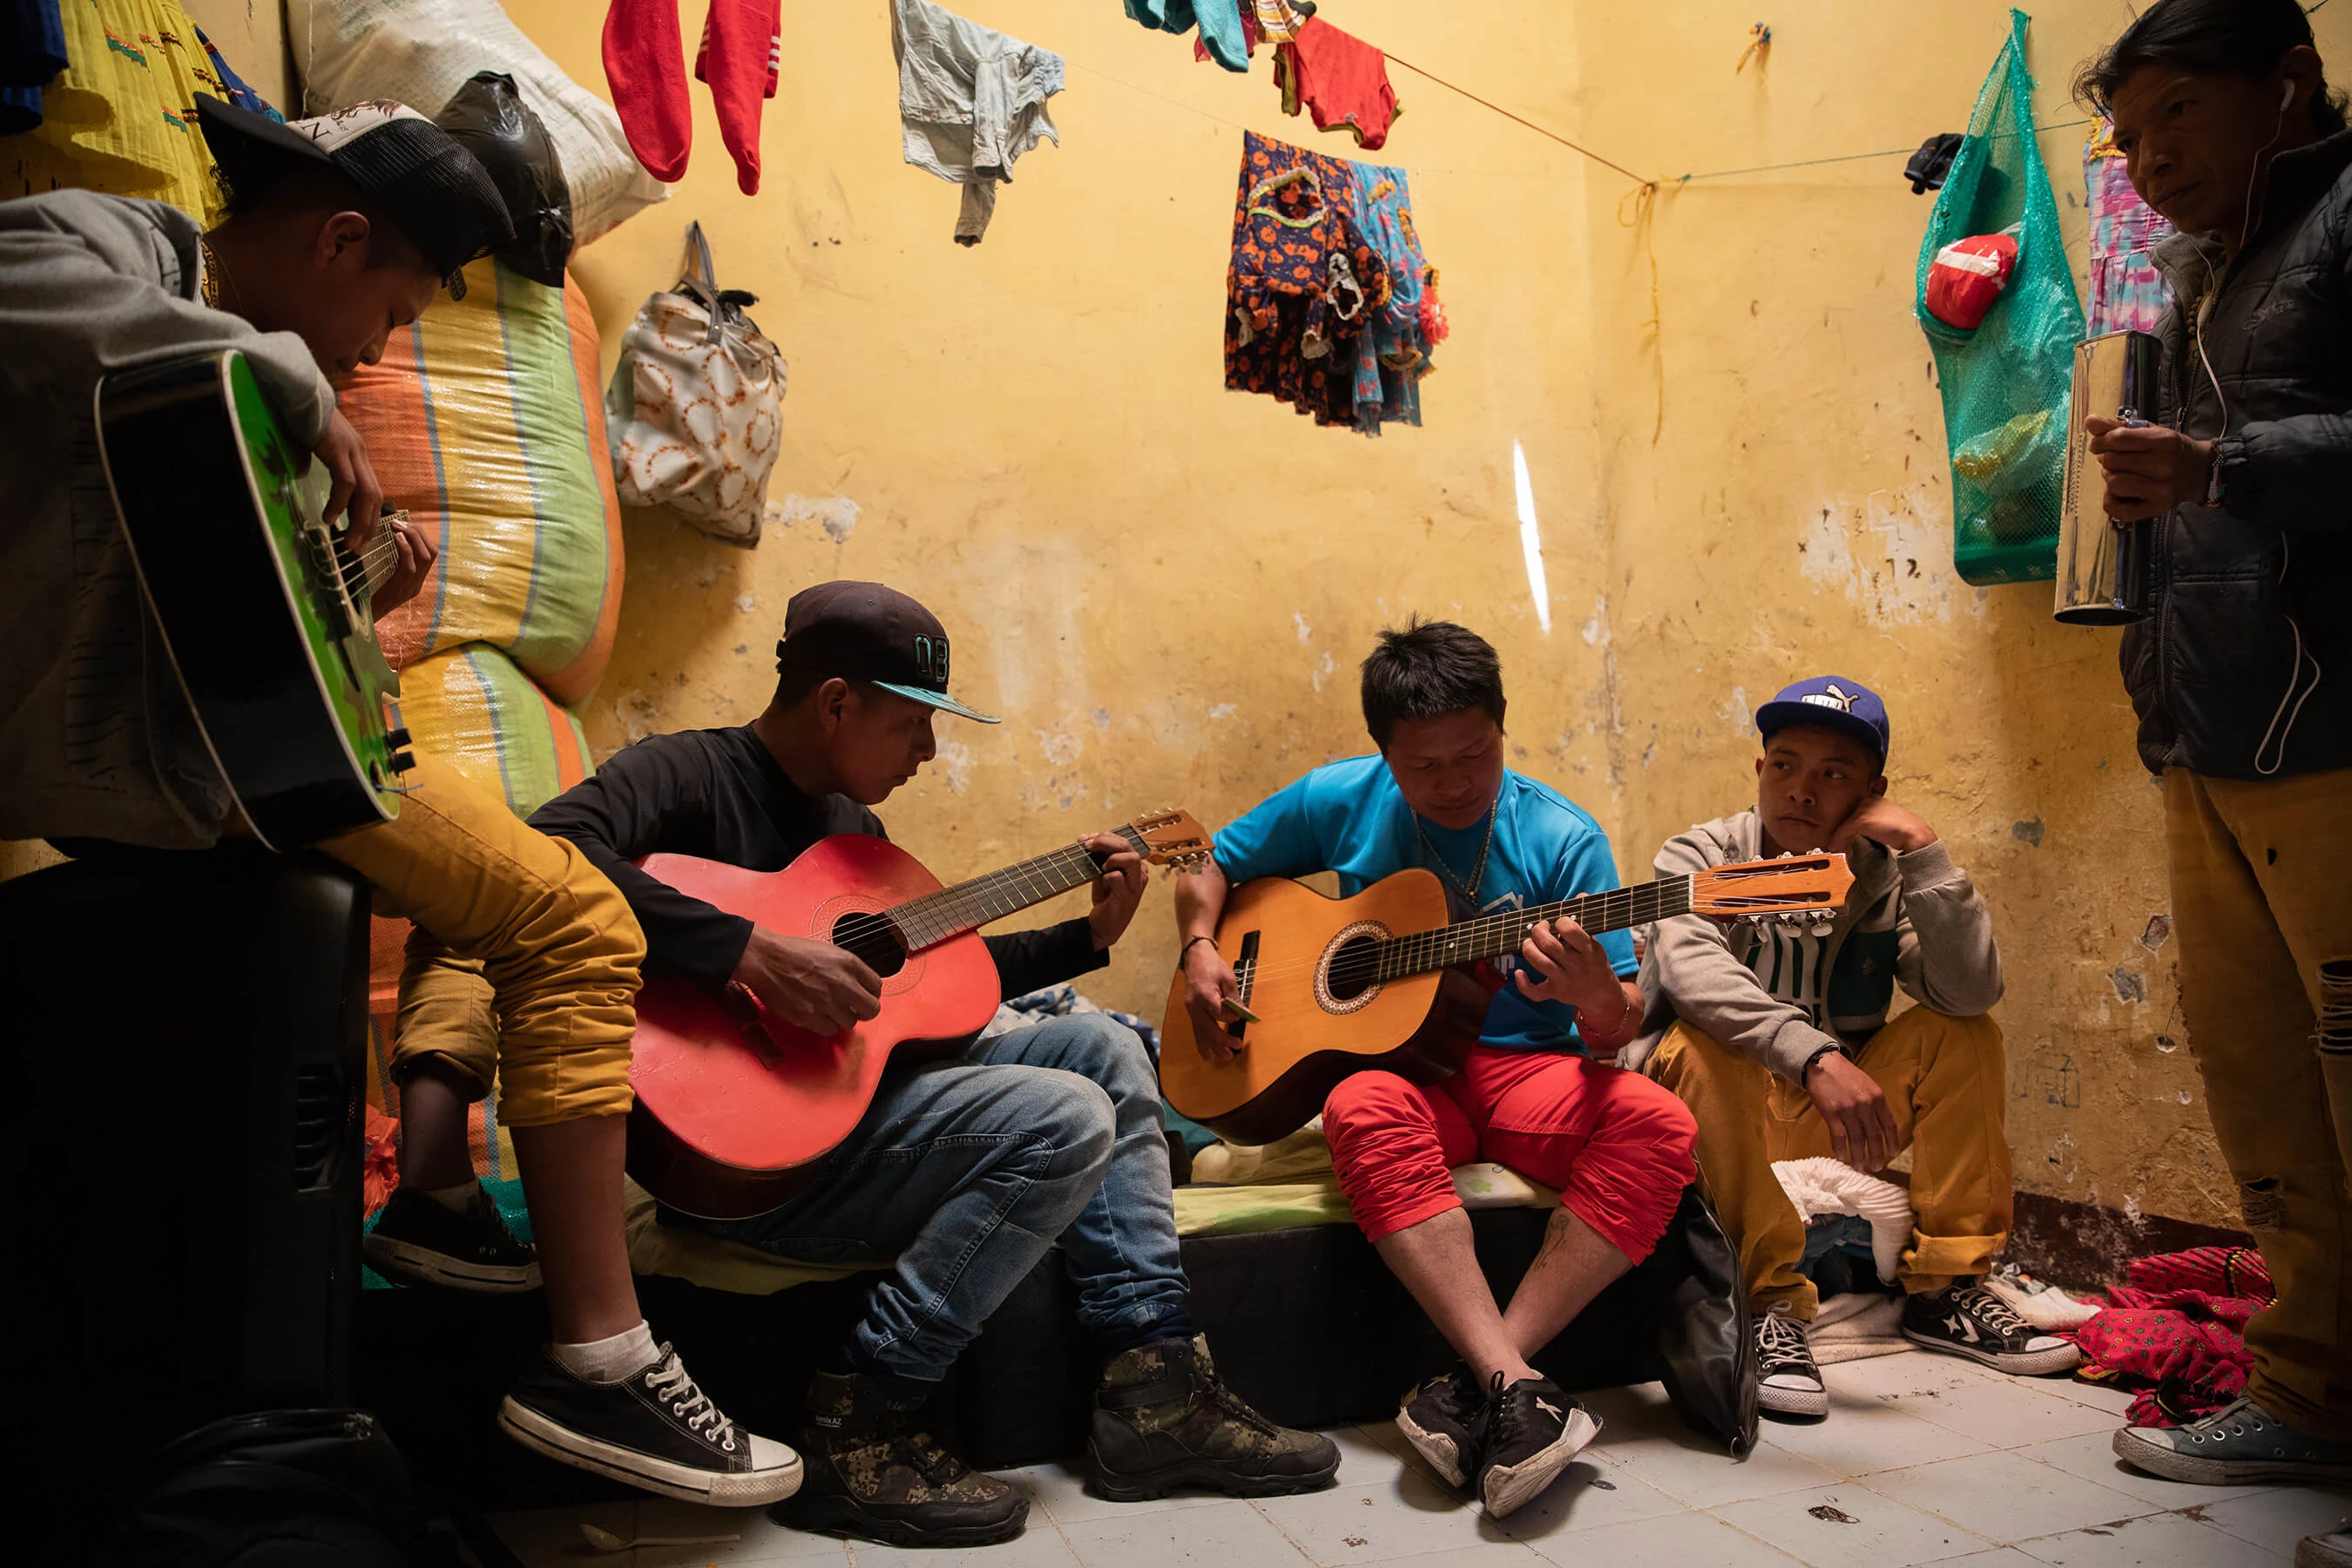 L: The band Chocobida formed after being displaced. They sing songs in their native Embera recalling their experiences such as “We Came to Bogota Because We Were Forced To”. R: A woman makes use of available space to hang her traditional dresses to dry